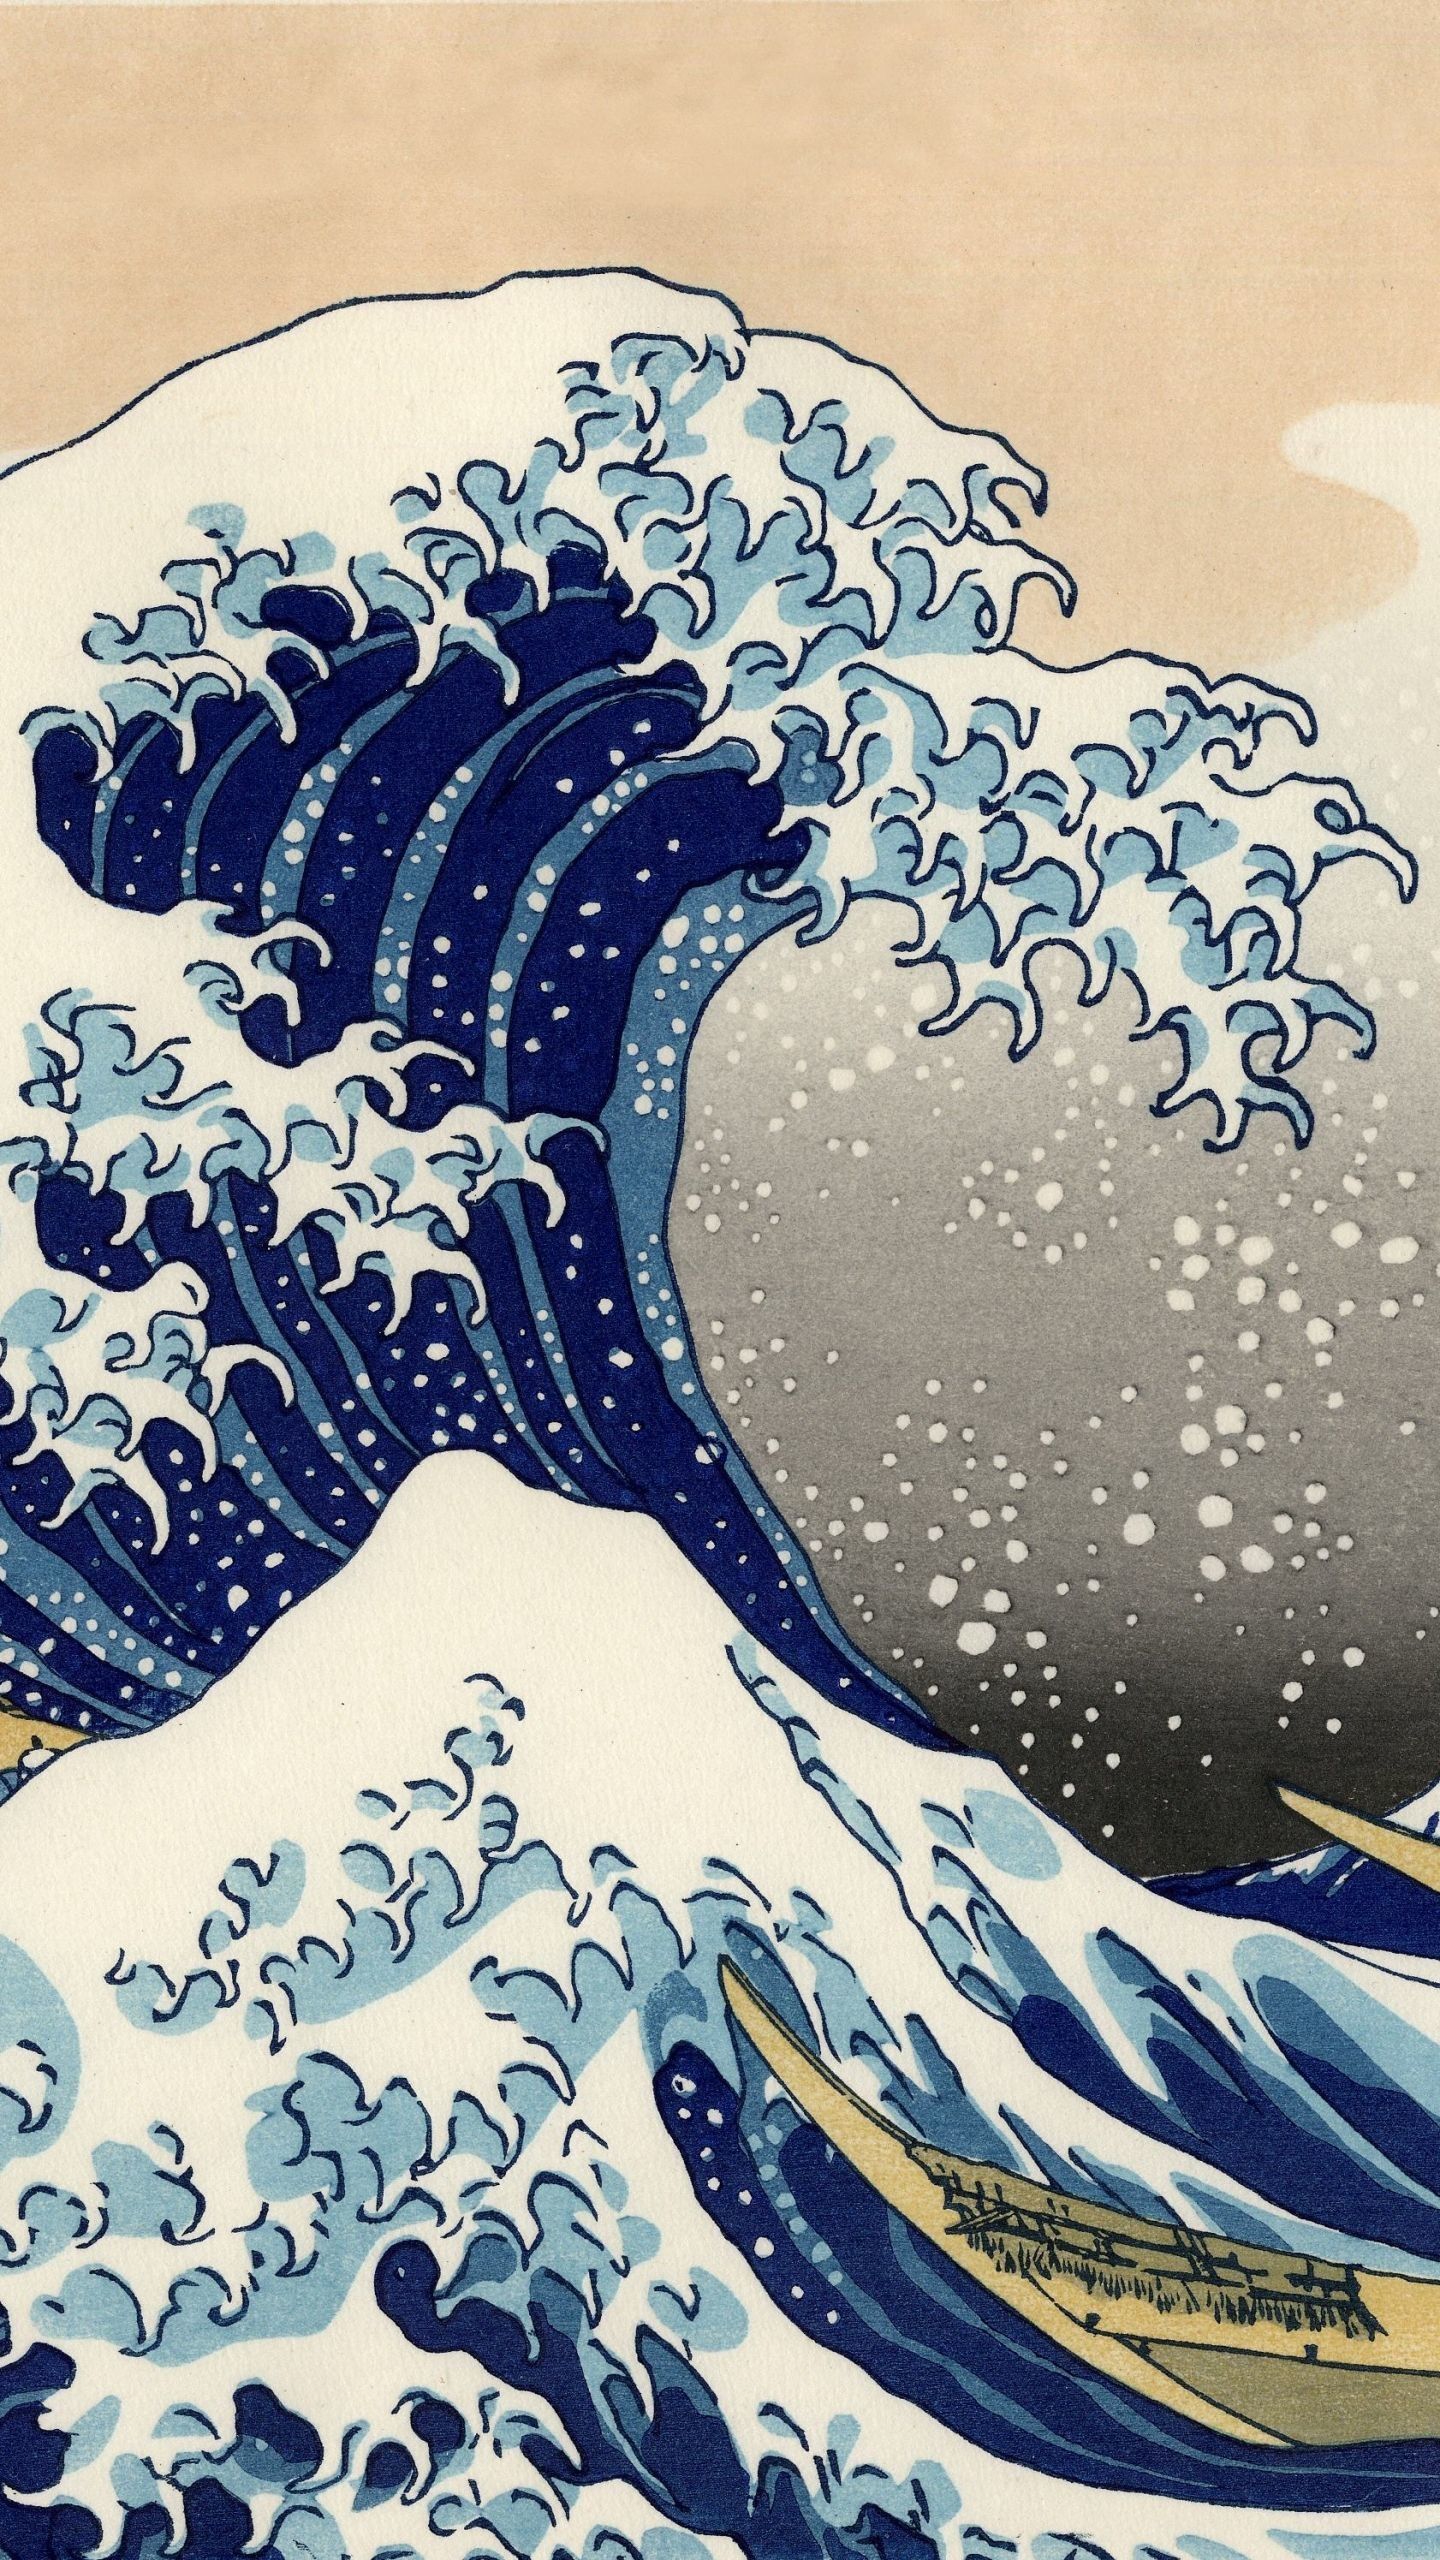 A painting of the great wave off kansai - The Great Wave off Kanagawa